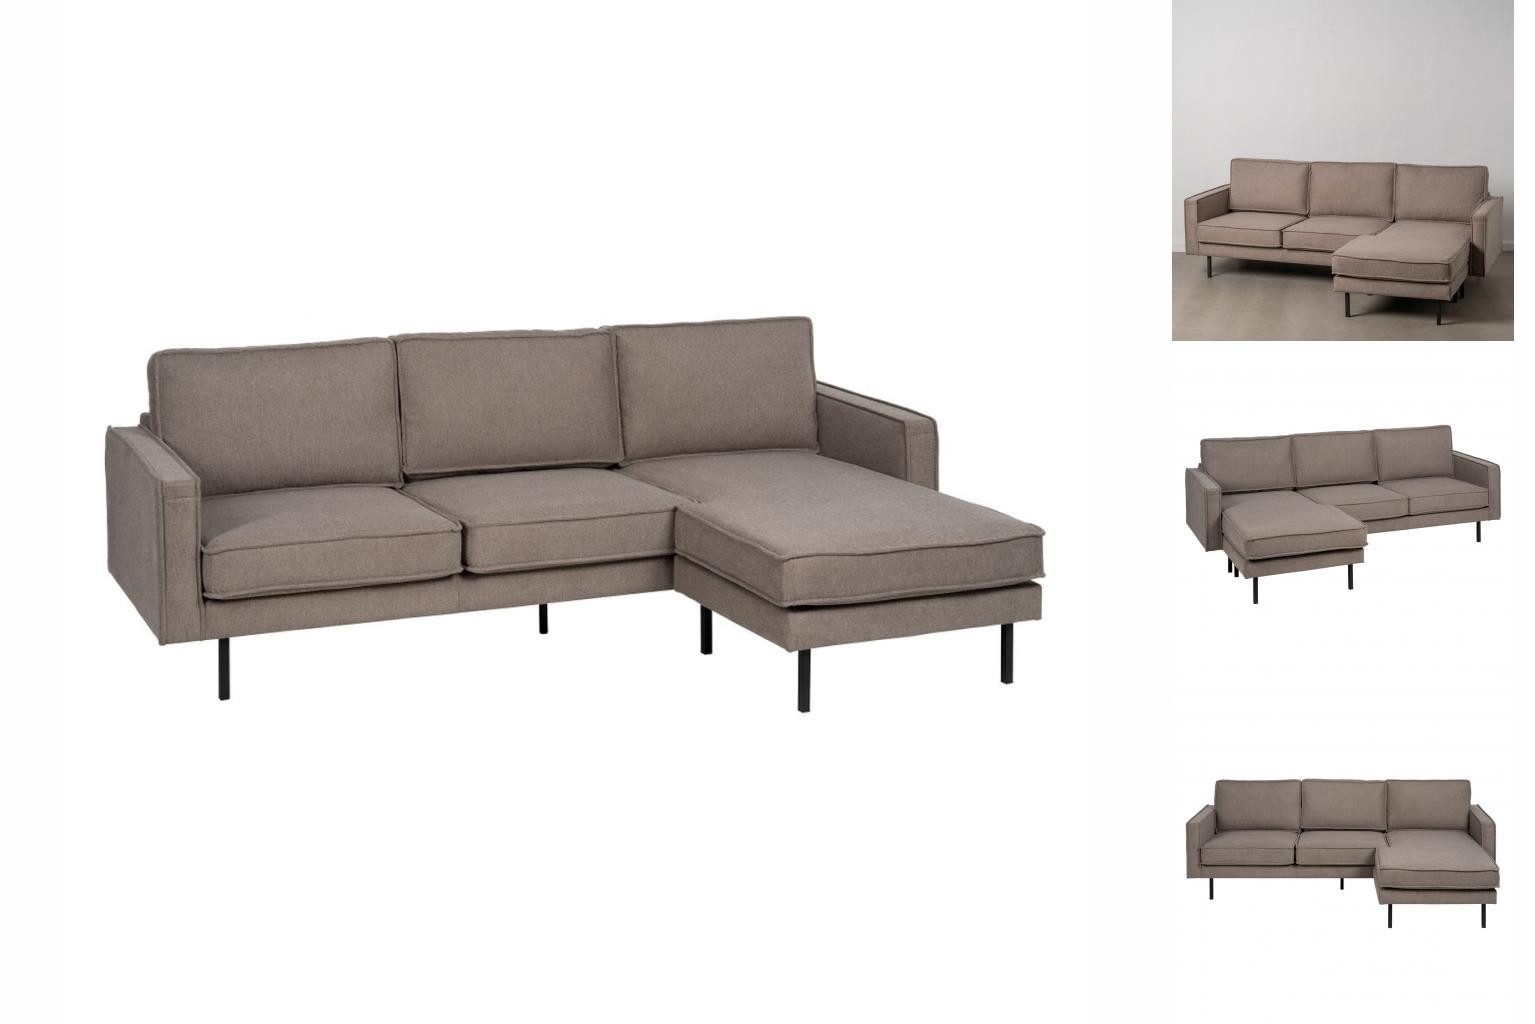 Bigbuy Sofa Sofa Taupe 235 x 155 x 87 cm Eck-Couch Chaise Longue